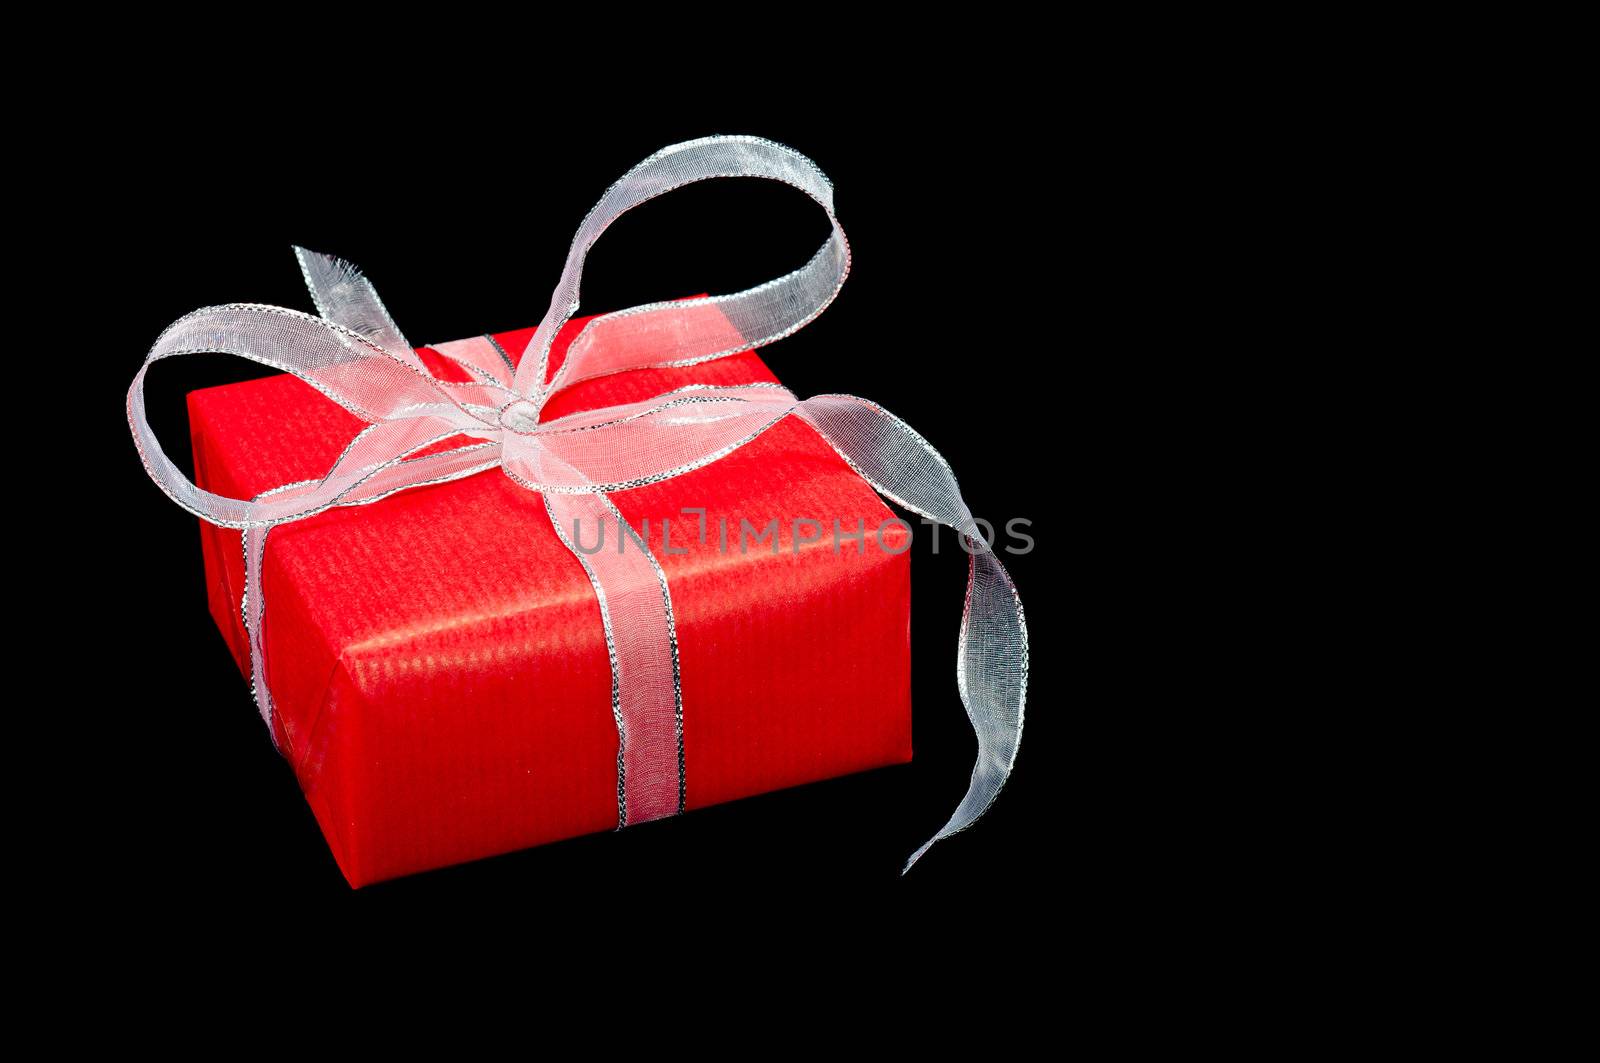 Red and Silver Xmas Gift Box on Black by timh